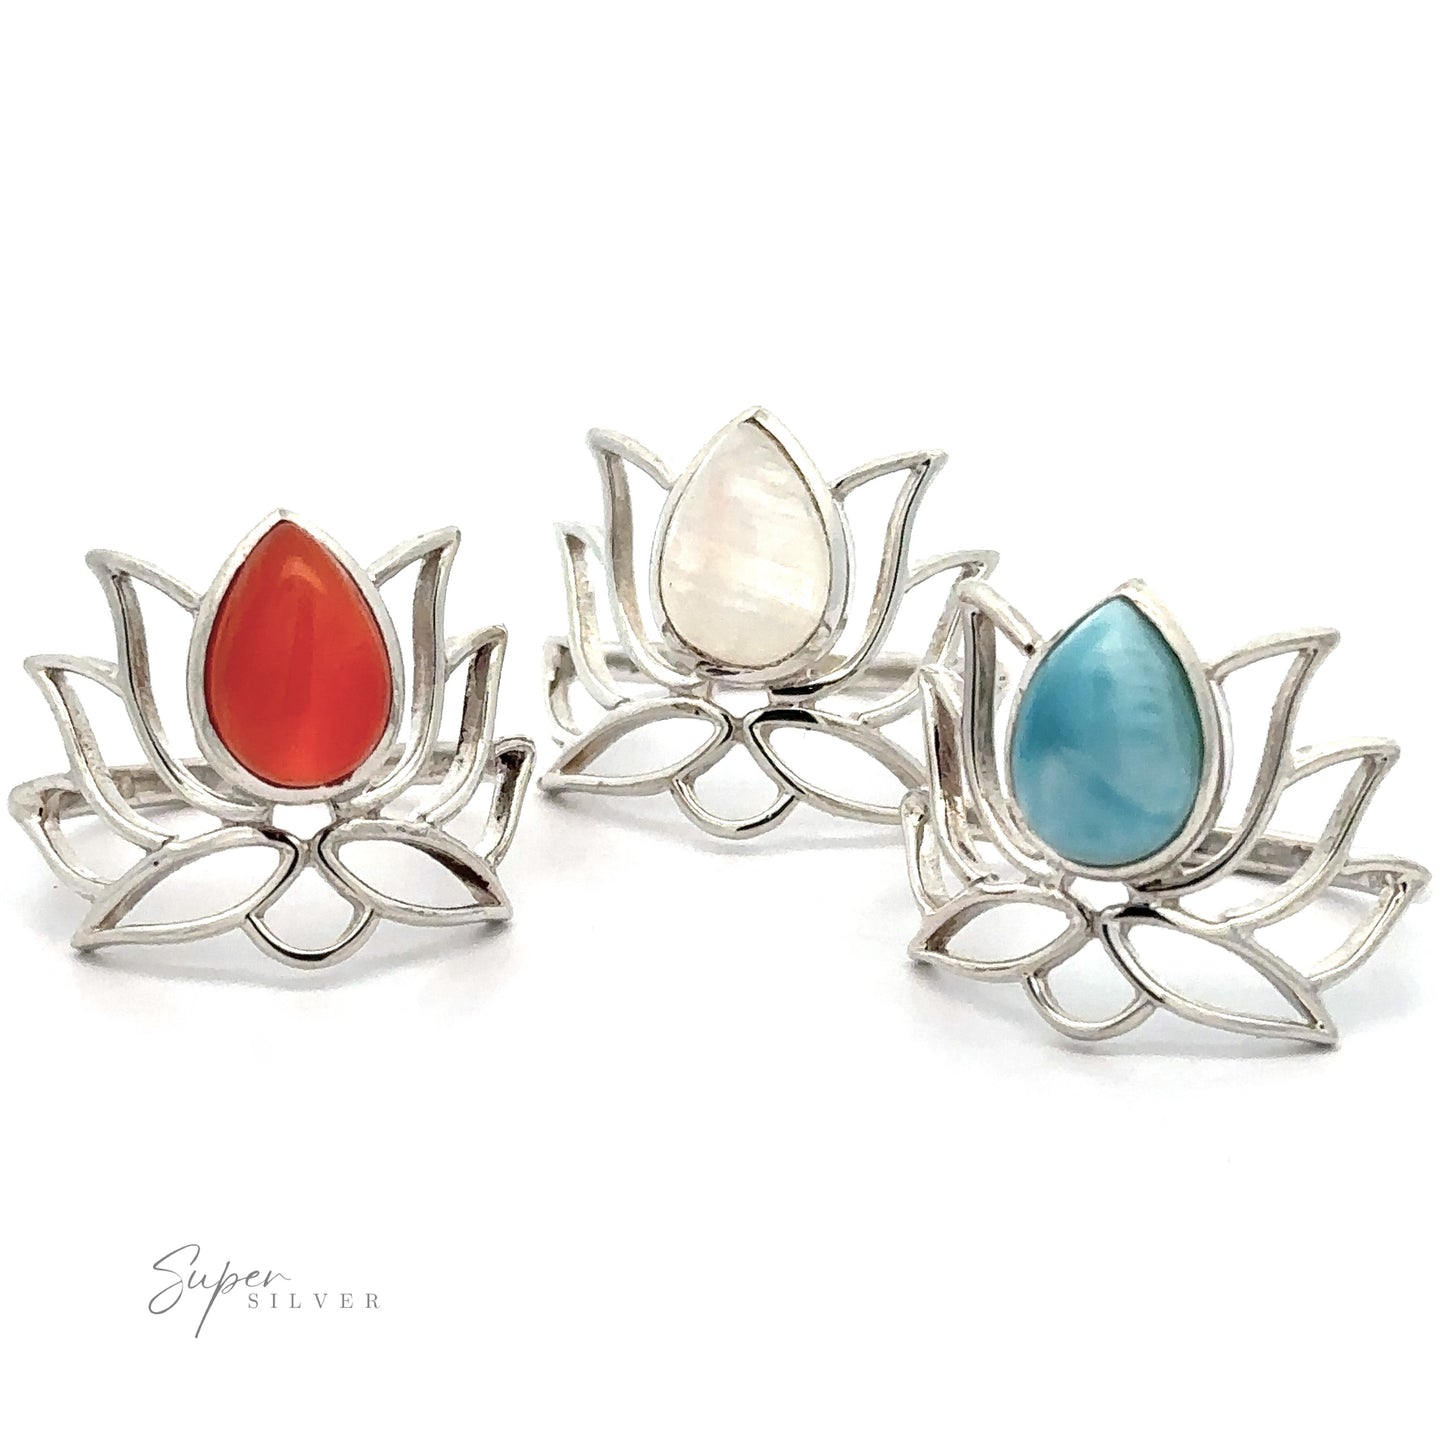 Three Online Exclusive Teardrop Stone Lotus Rings with orange, white, and blue teardrop gemstone centers displayed against a white background.